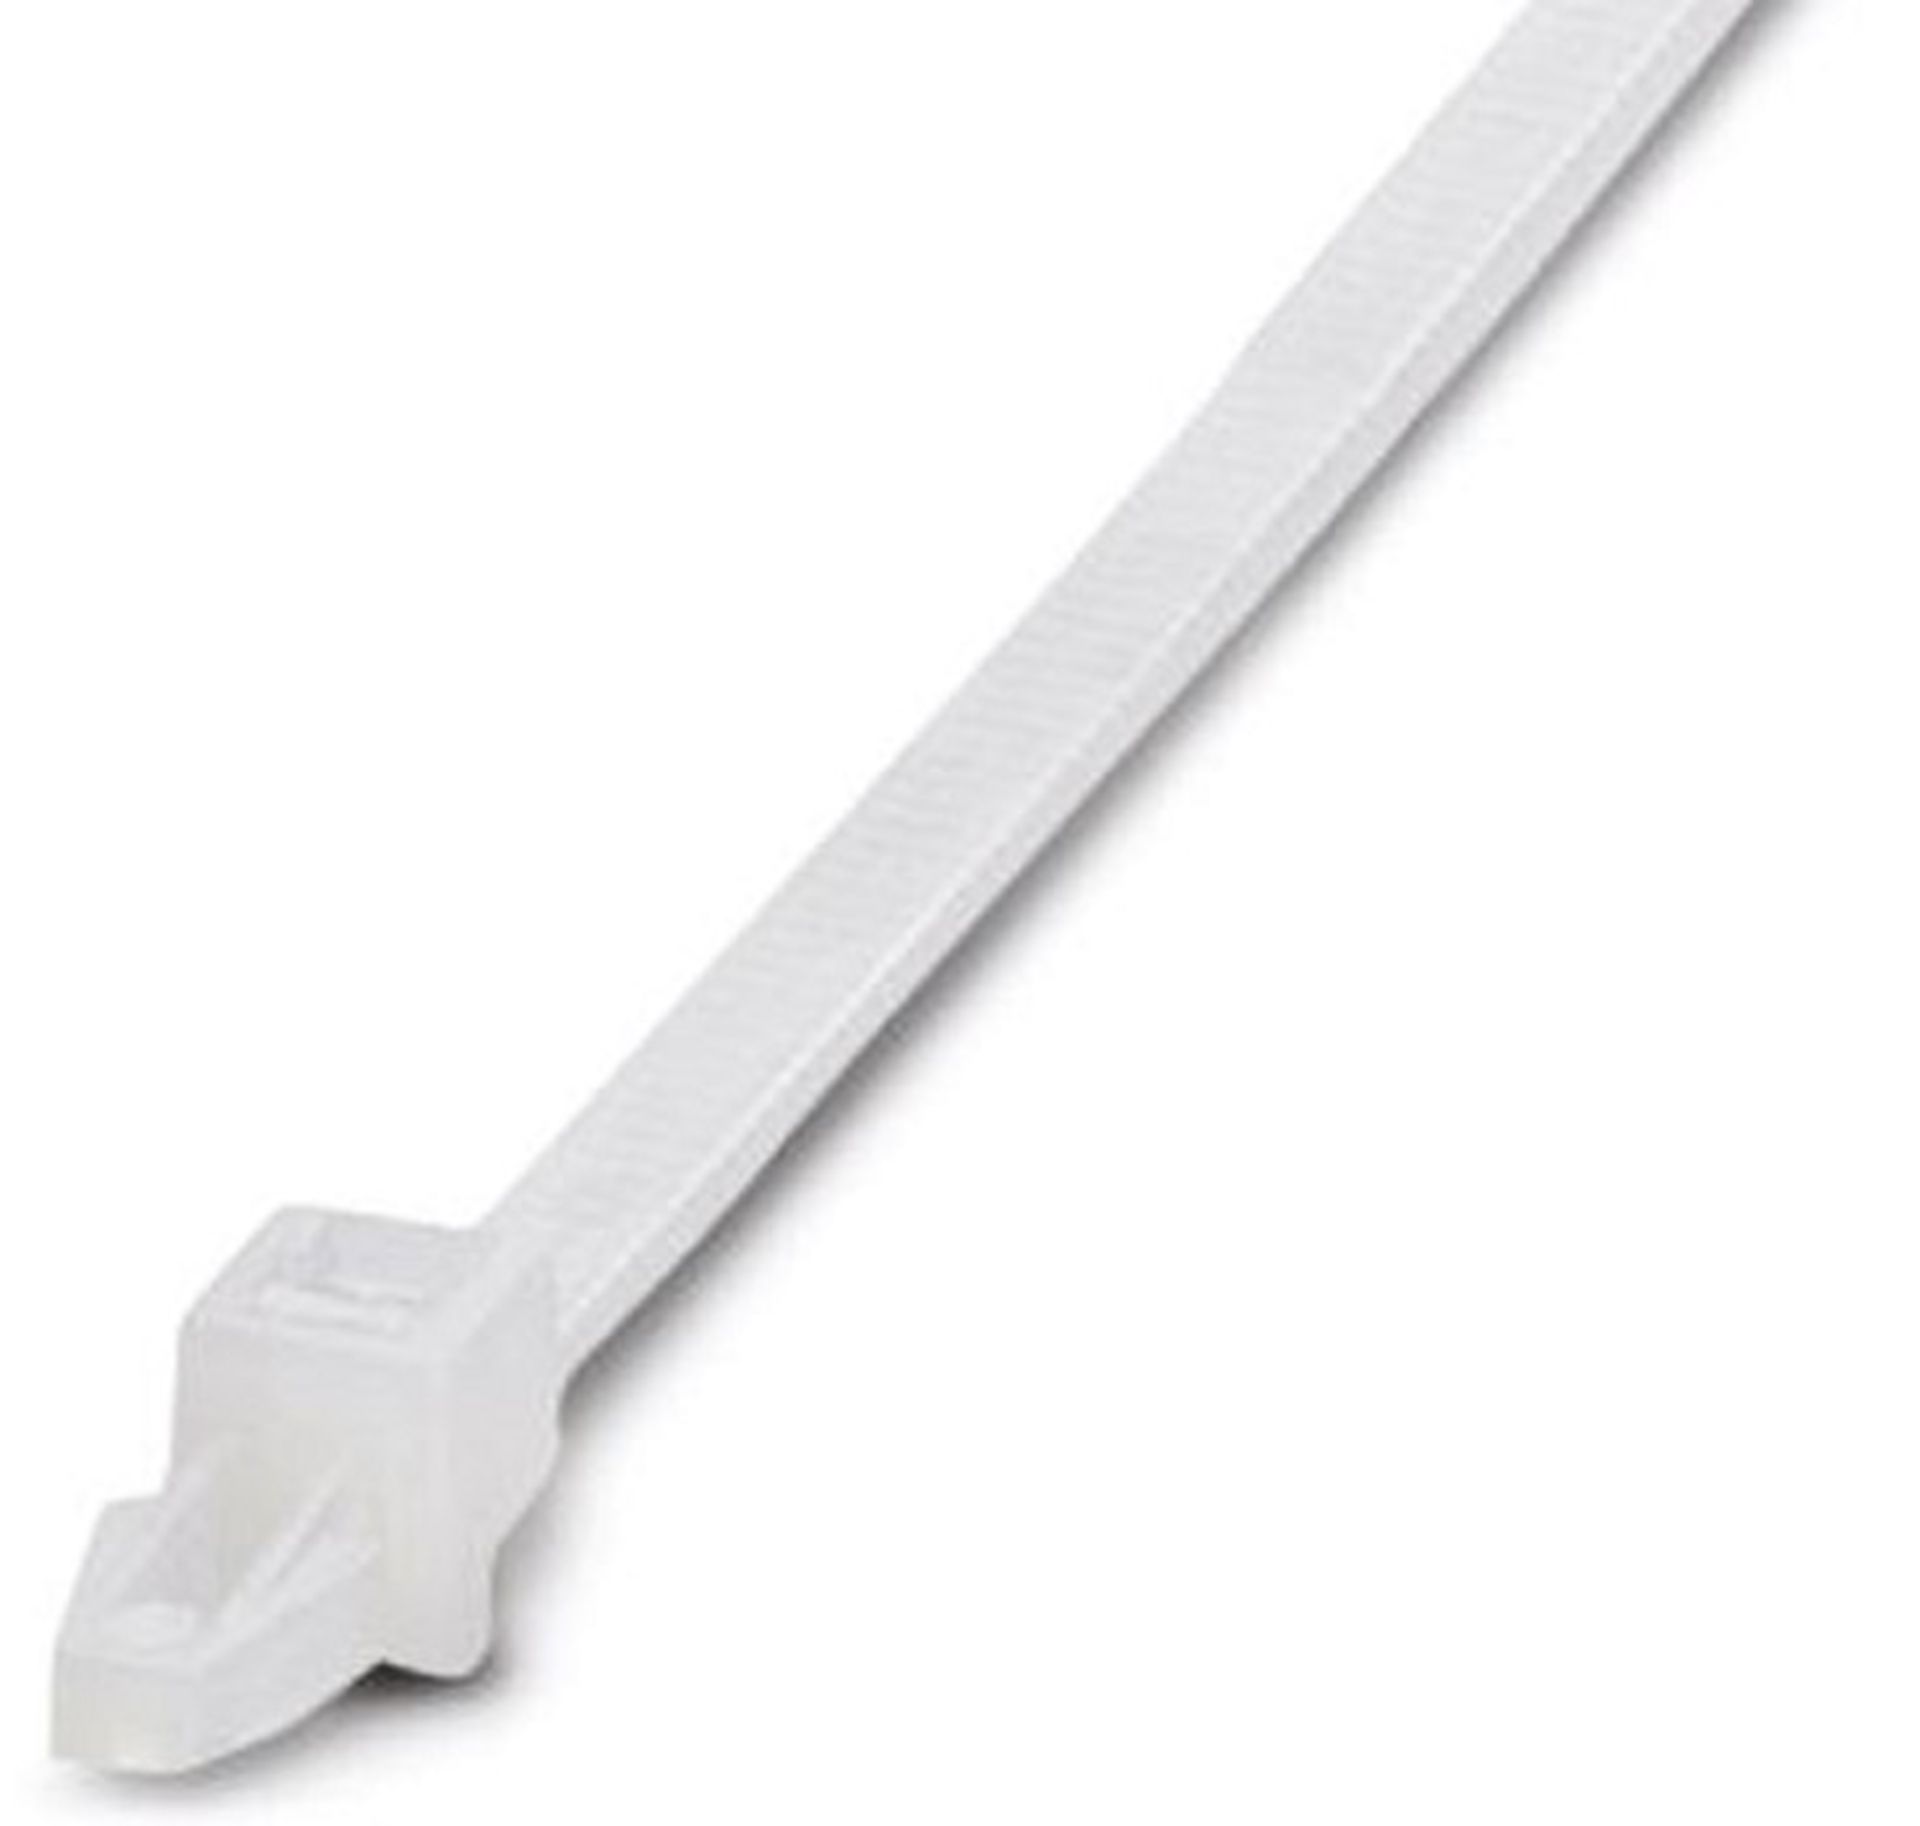 7000 x Phoenix Contact Natural Nylon Cable Tie, 200mm x 4.8 mm